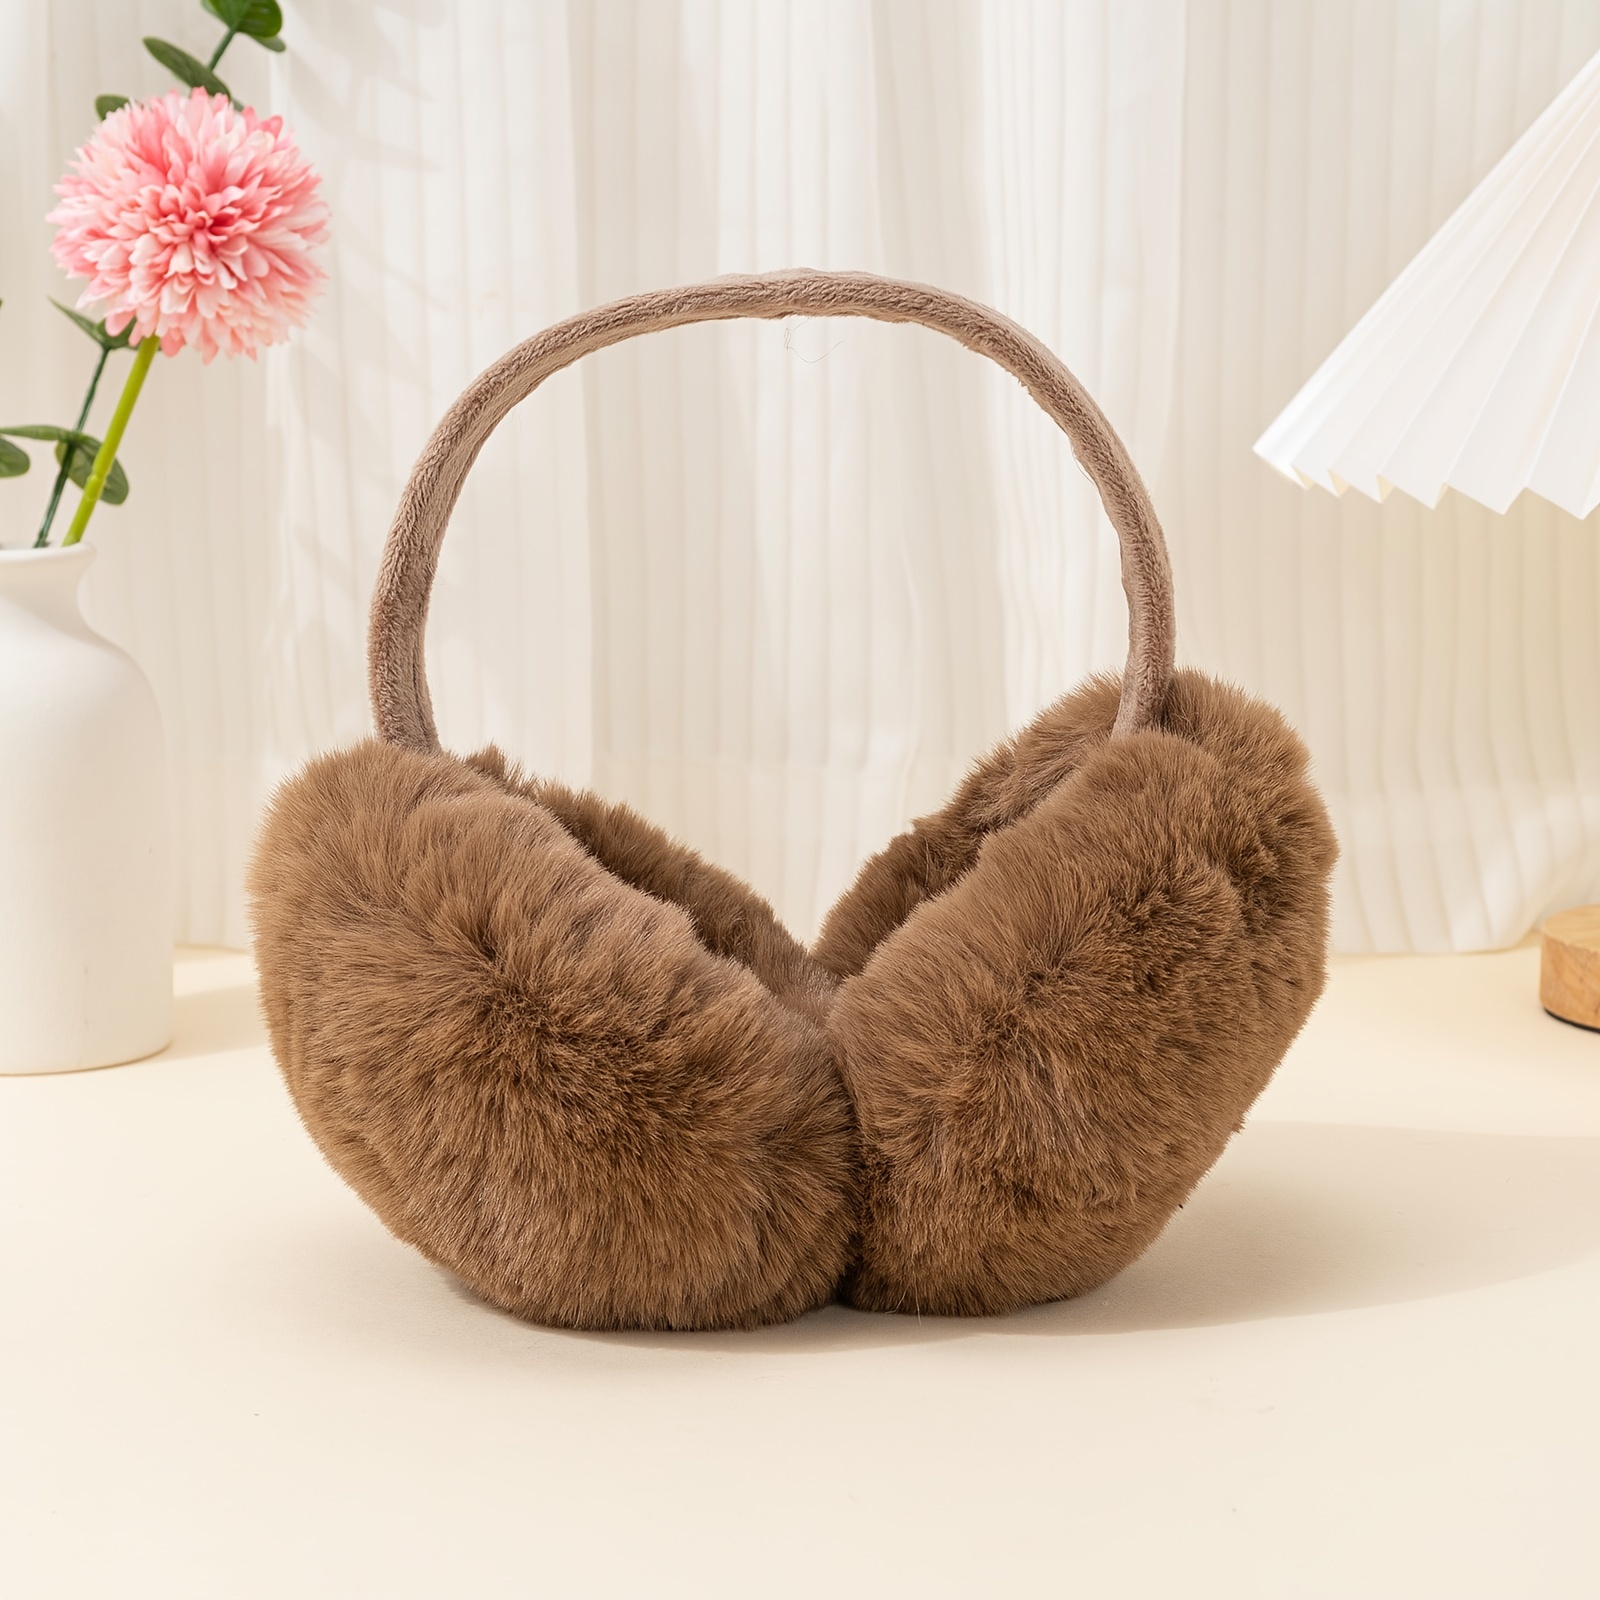 The 6 Best Earmuffs and Ear Warmers for Winter (For Men) - The